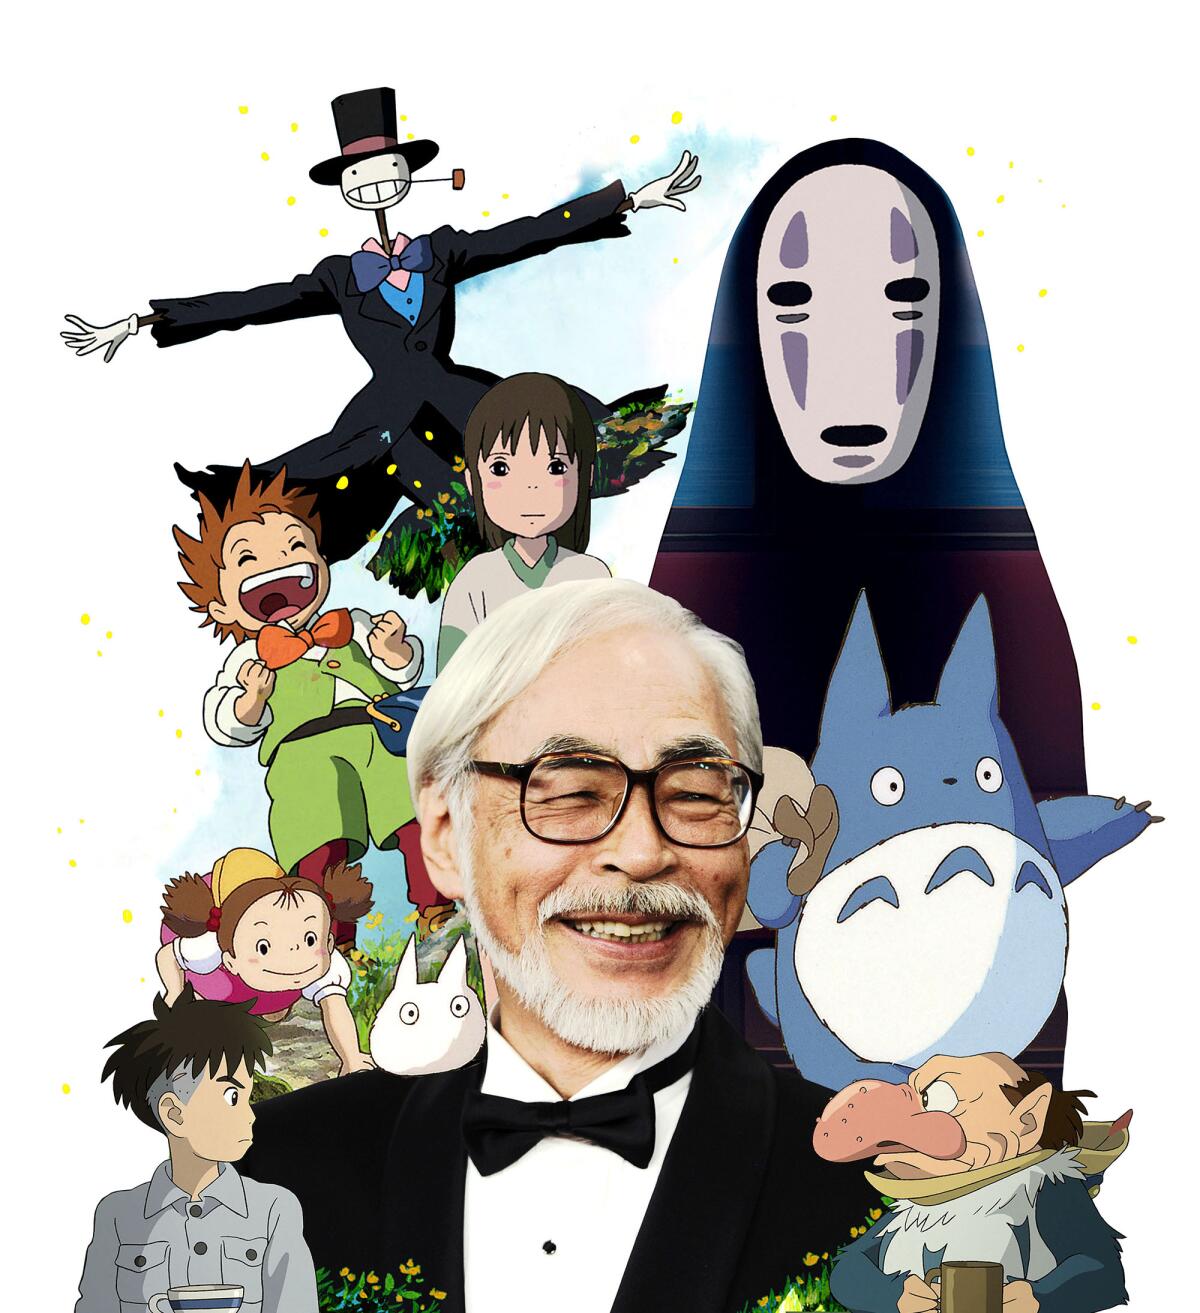 Hayao Miyazaki's optimism dims in ‘The Boy and the Heron’ - Los Angeles ...